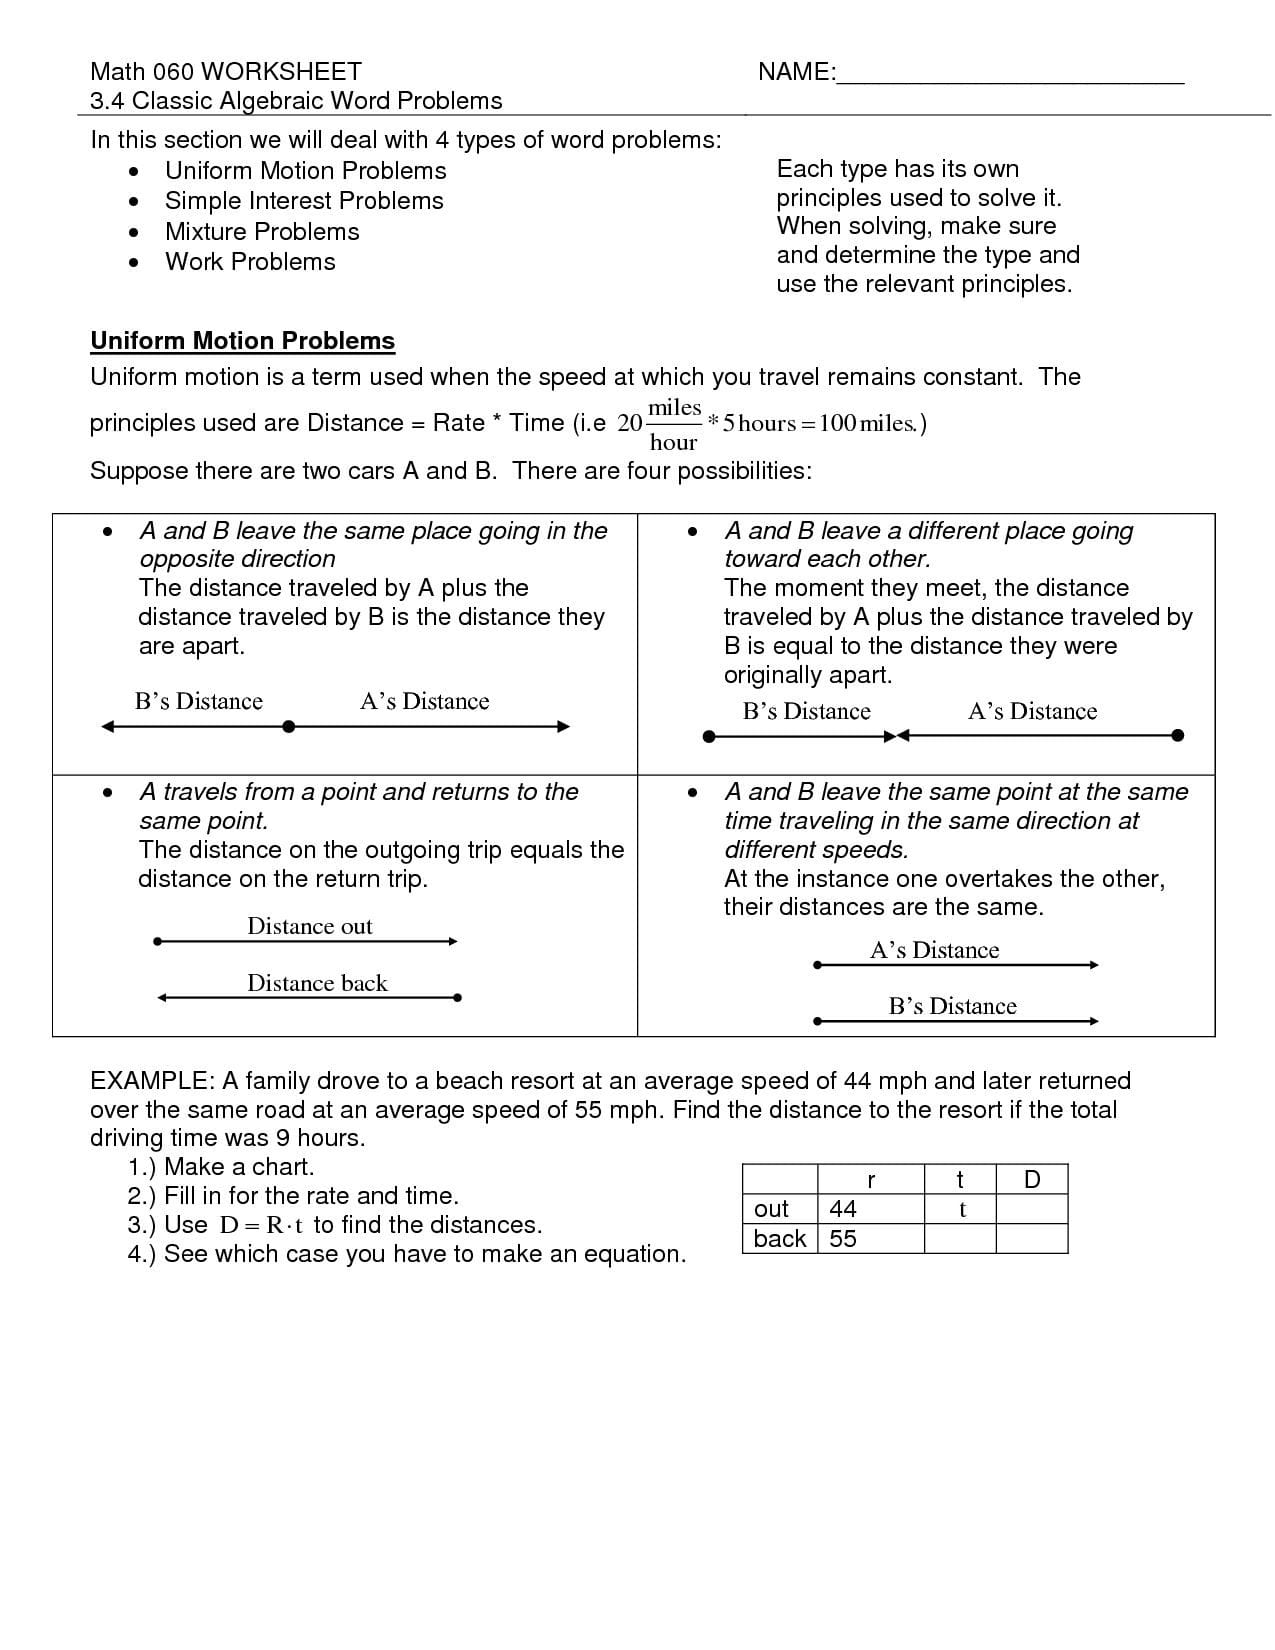 Markups And Markdowns Word Problems Matching Worksheet Answers Or Markups And Markdowns Word Problems Matching Worksheet Answers